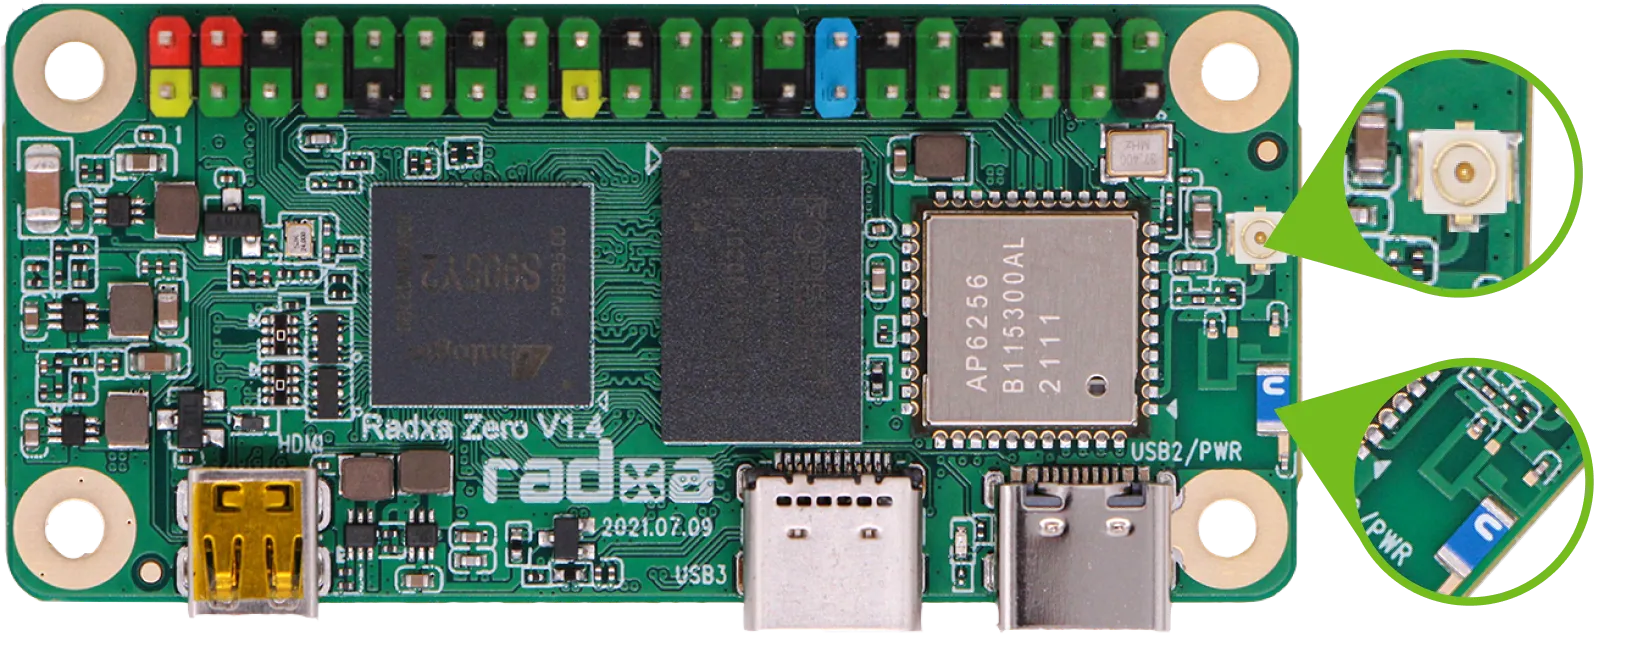 Onboard Dual-Mode WiFi and Bluetooth